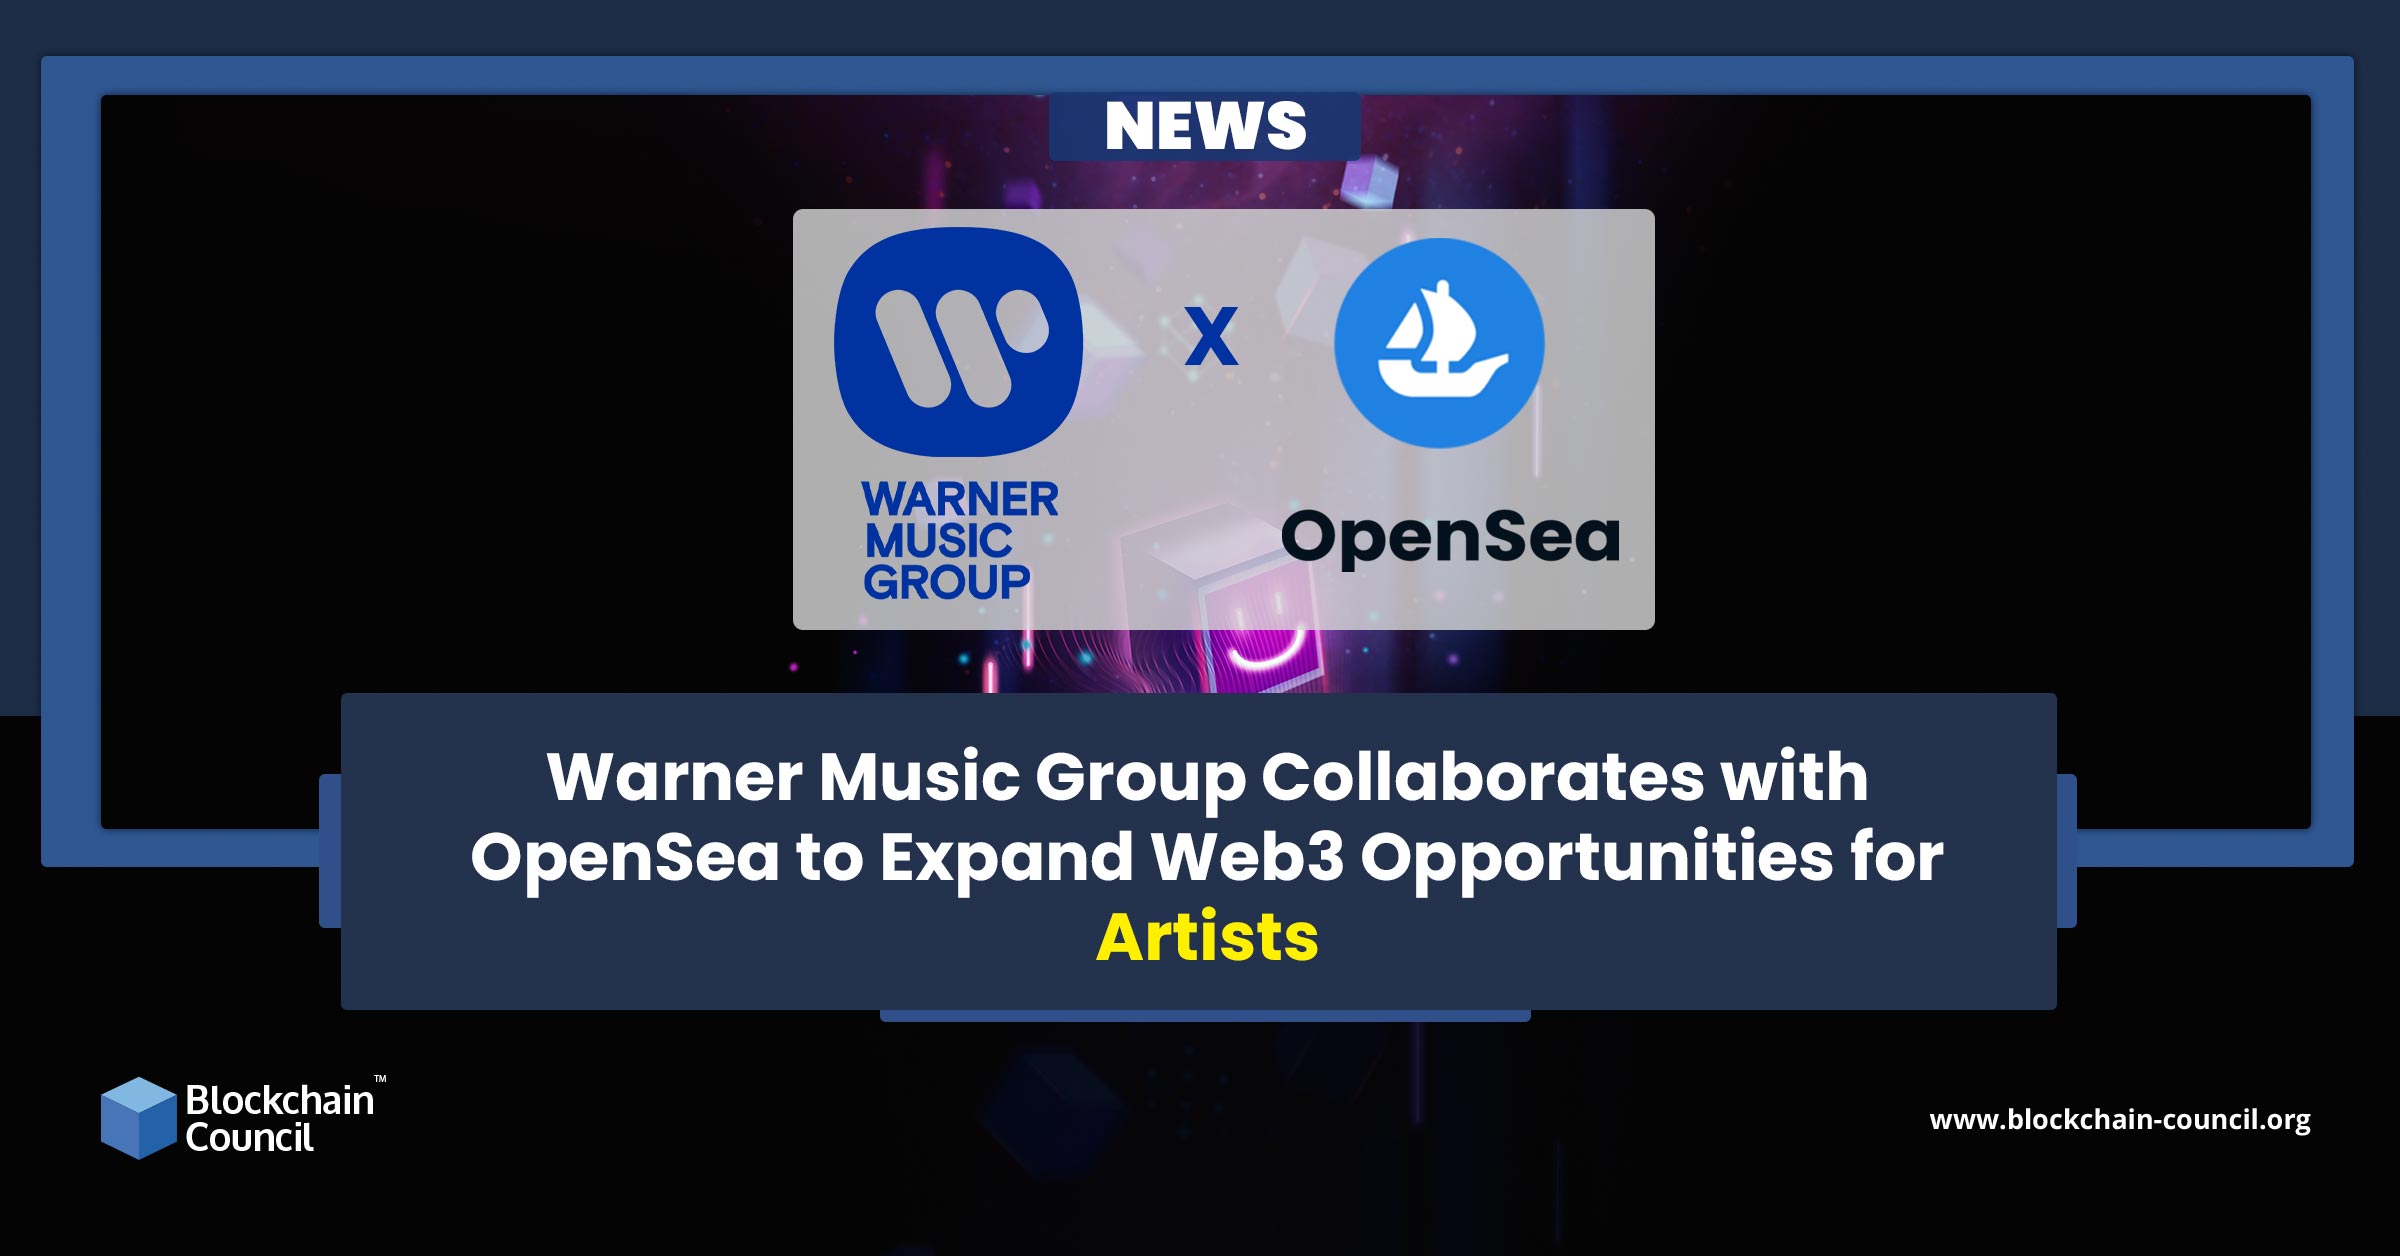 Warner Music Group Collaborates with OpenSea to Expand Web3 Opportunities for Artists